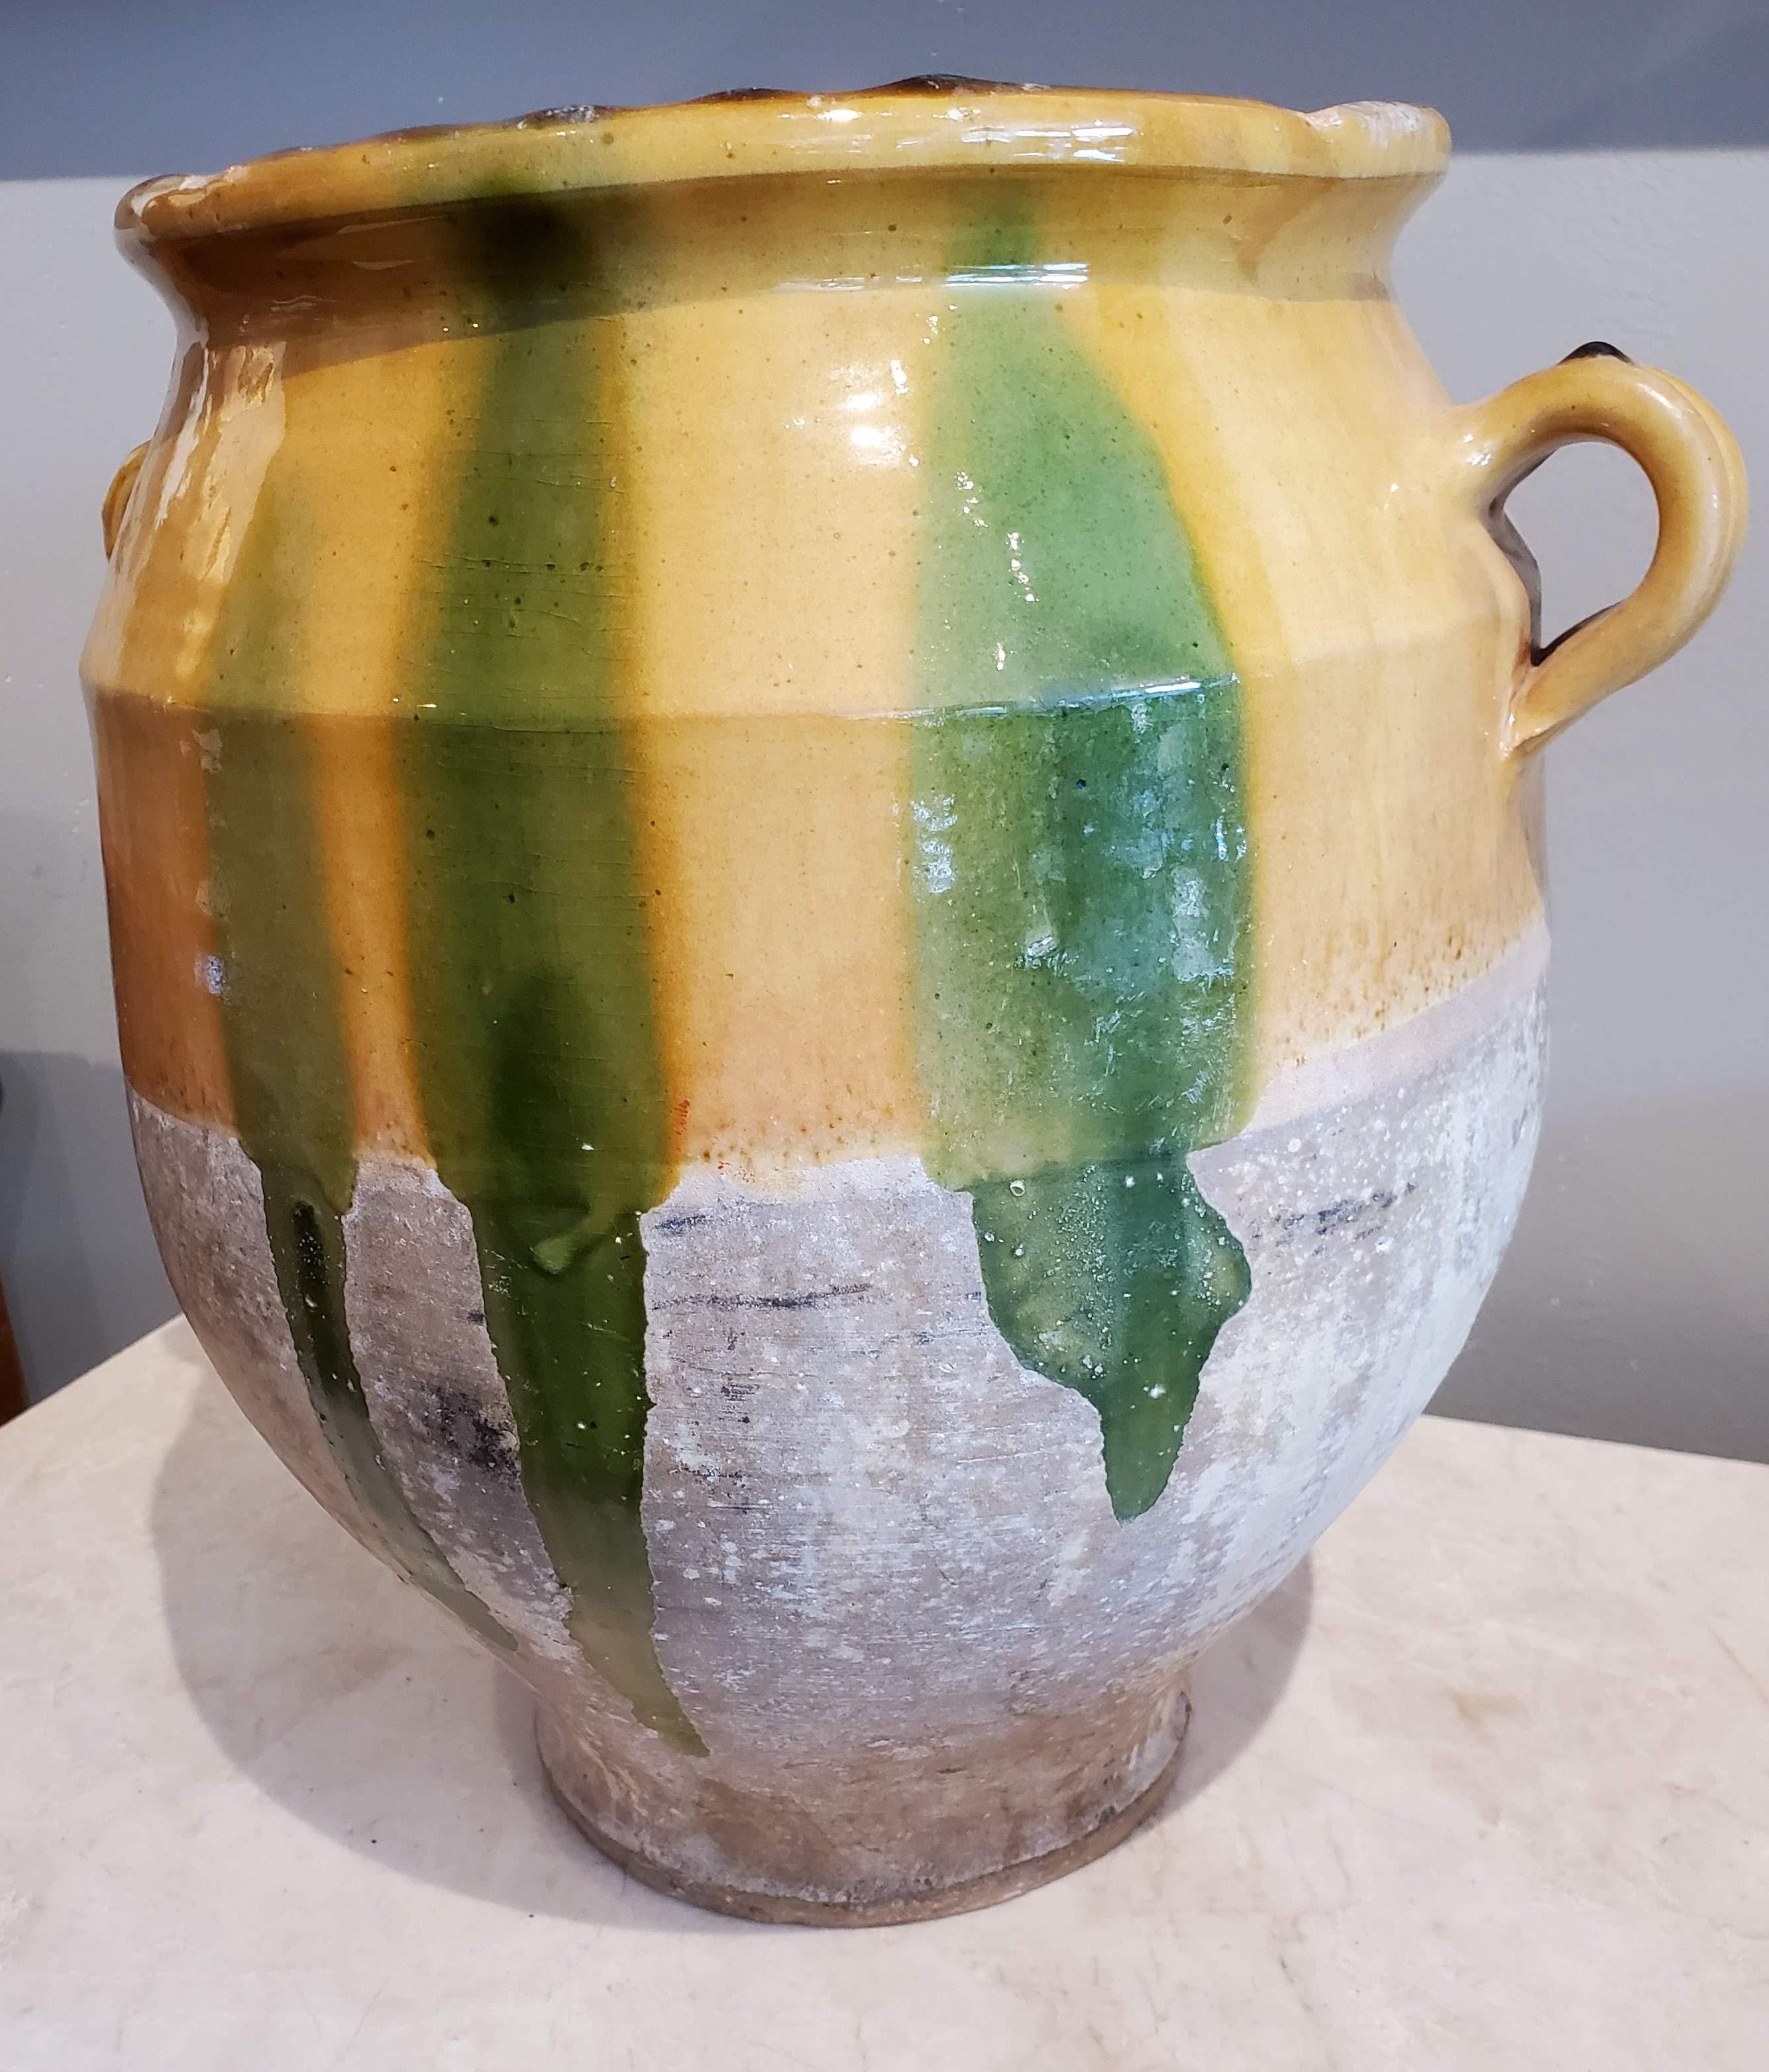 19th century large green glazed terracotta “Confit” pot. Once a staple in French kitchens, confit pots were popular to preserve and Cook duck before refrigeration existed. 
Provence, circa 1880
Measures: 12.5